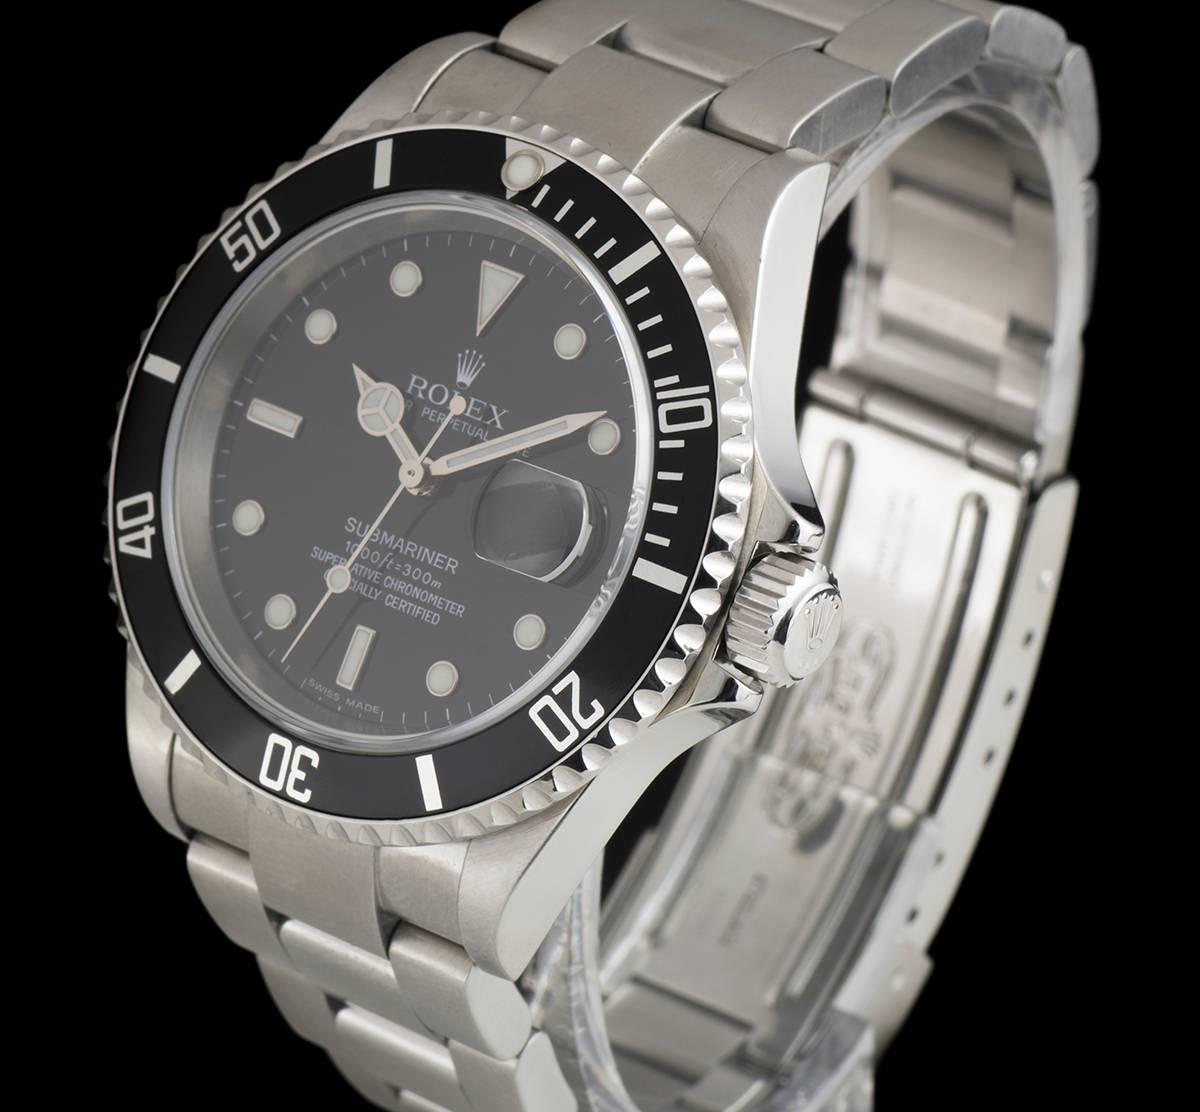 A Stainless Steel Oyster Perpetual Submariner Date Gents Wristwatch, black dial with applied hour markers, date at 3 0'clock, a stainless steel uni-directional rotating bezel with a black bezel insert, a stainless steel oyster bracelet with a